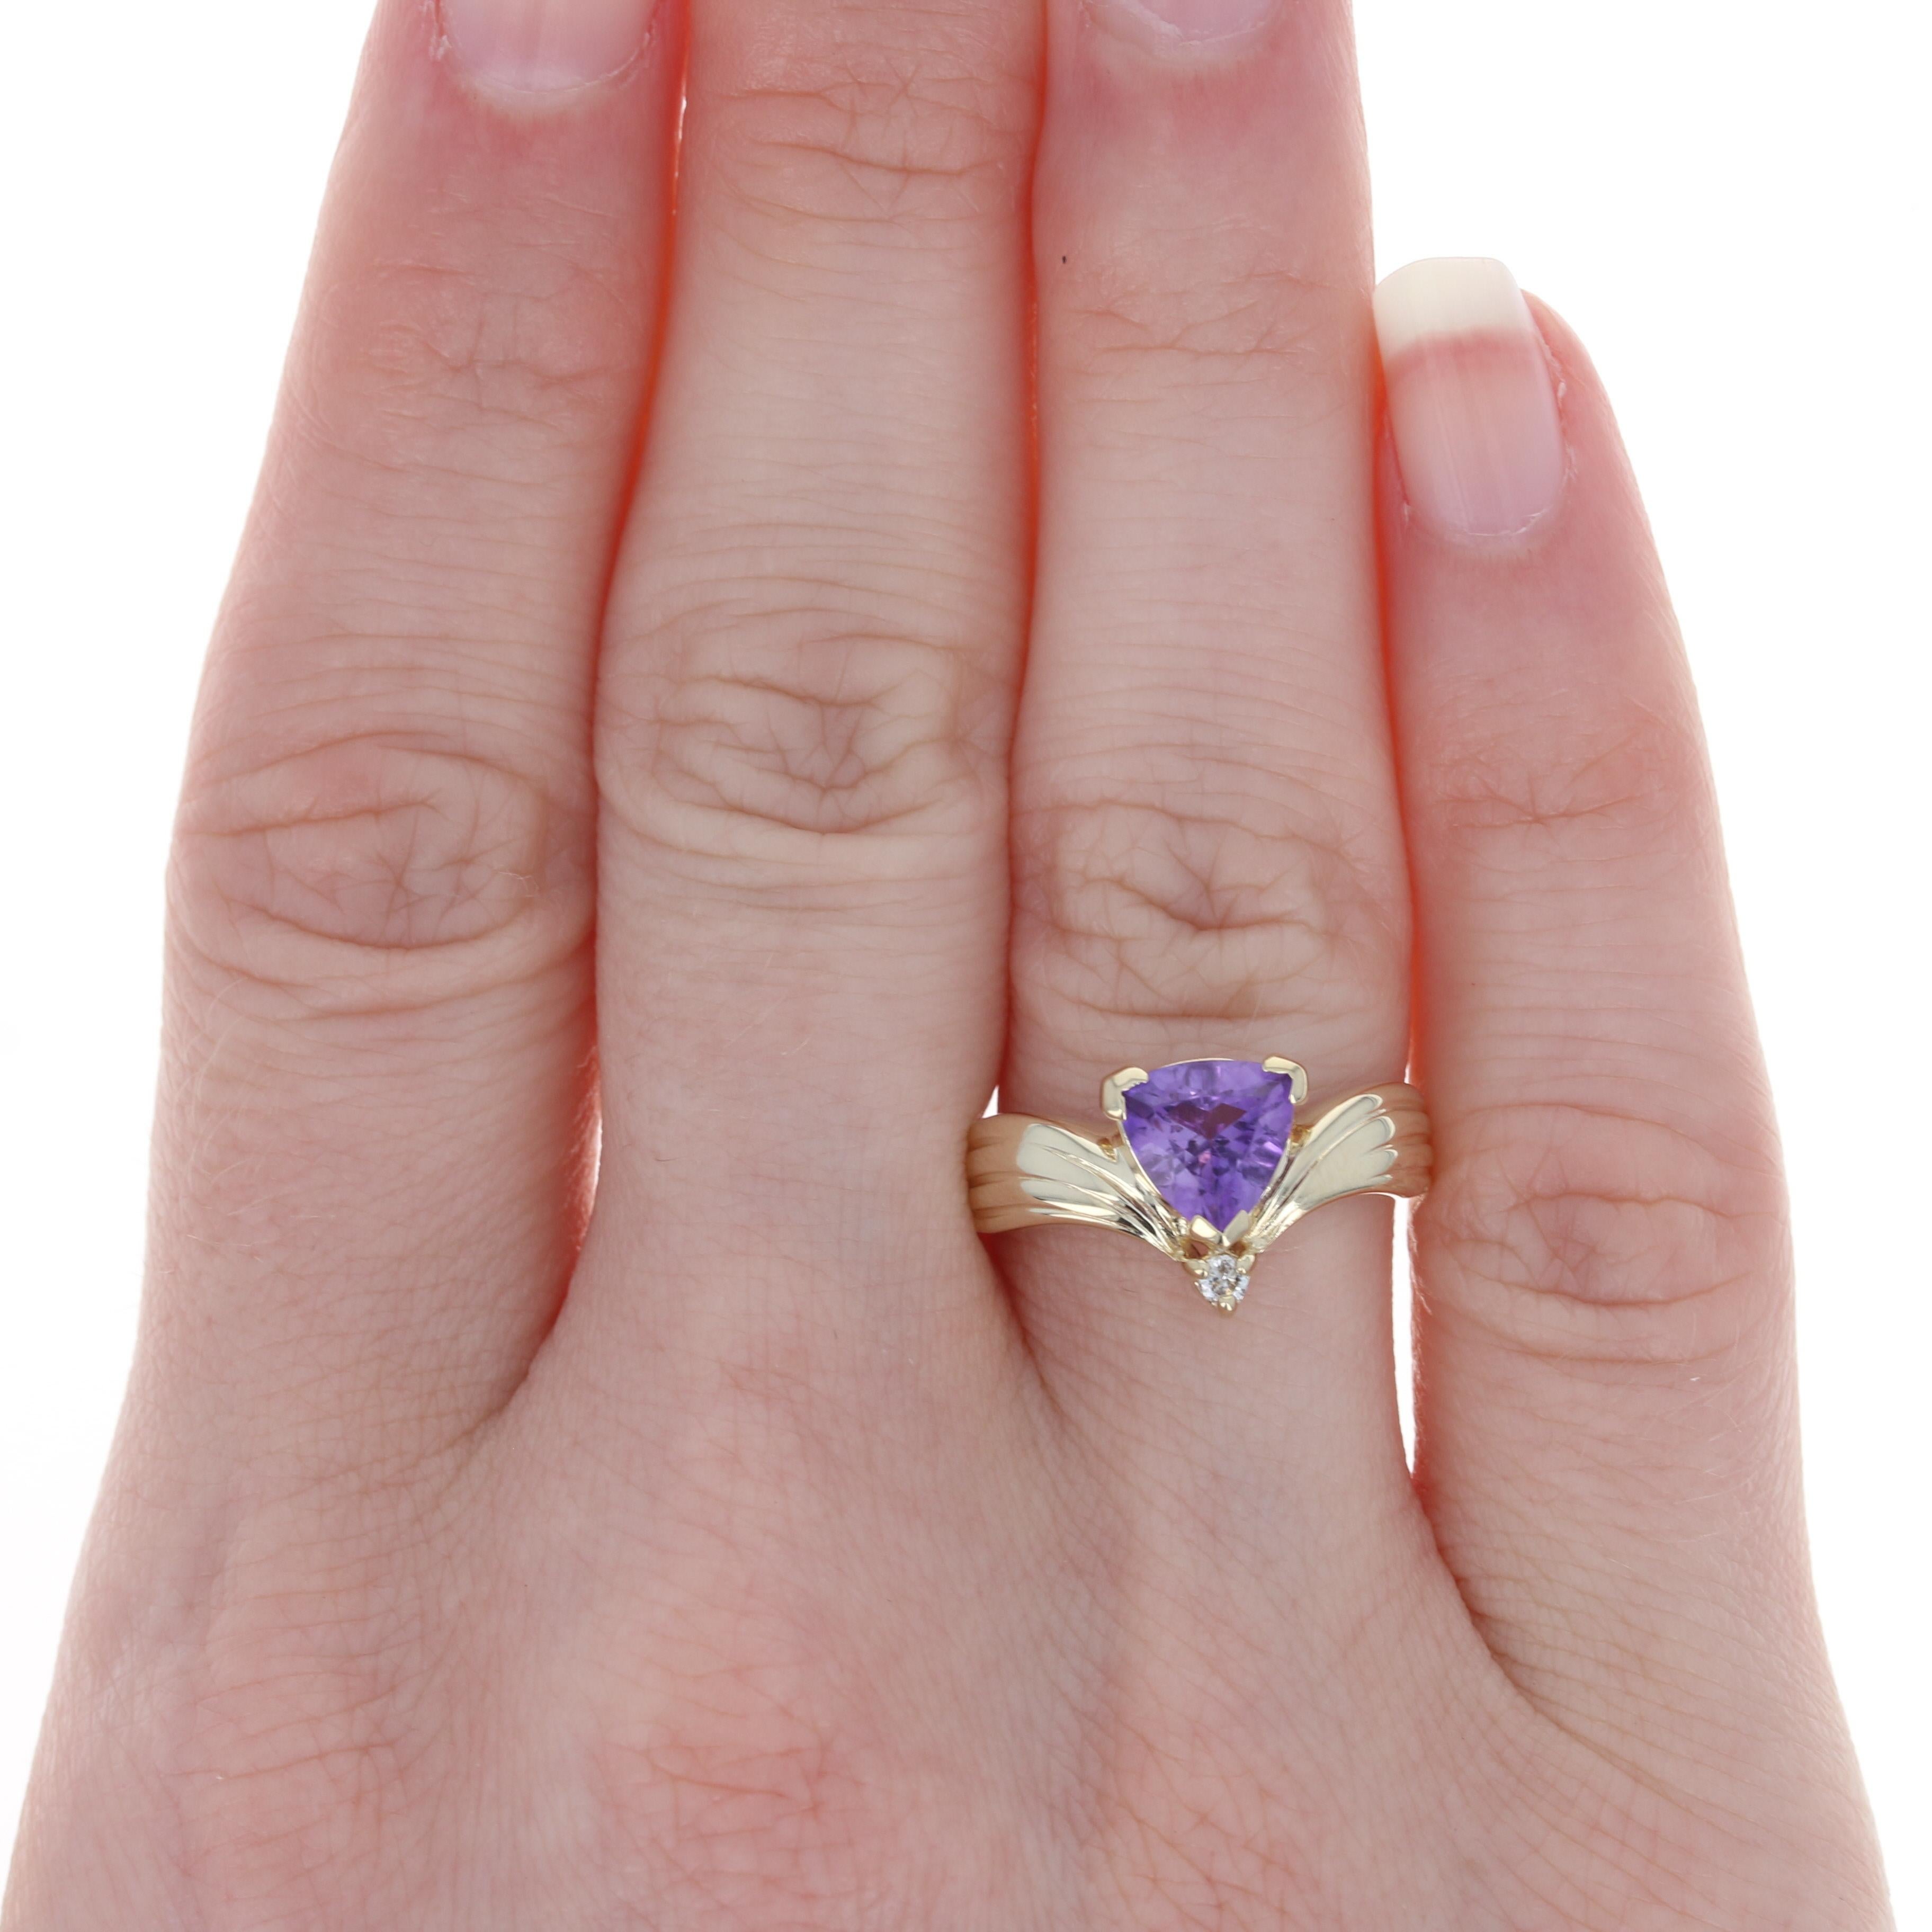 Size: 7 1/4
 Sizing Fee: Up 2 sizes for $25 or Down 2 sizes for $20
 
 Metal Content: 14k Yellow Gold
 
 Stone Information: 
 Genuine Amethyst
 Carat: 1.30ct
 Cut: Trillion
 Color: Purple 
 
 Natural Diamond
 Carat: .03ct
 Cut: Round Brilliant
